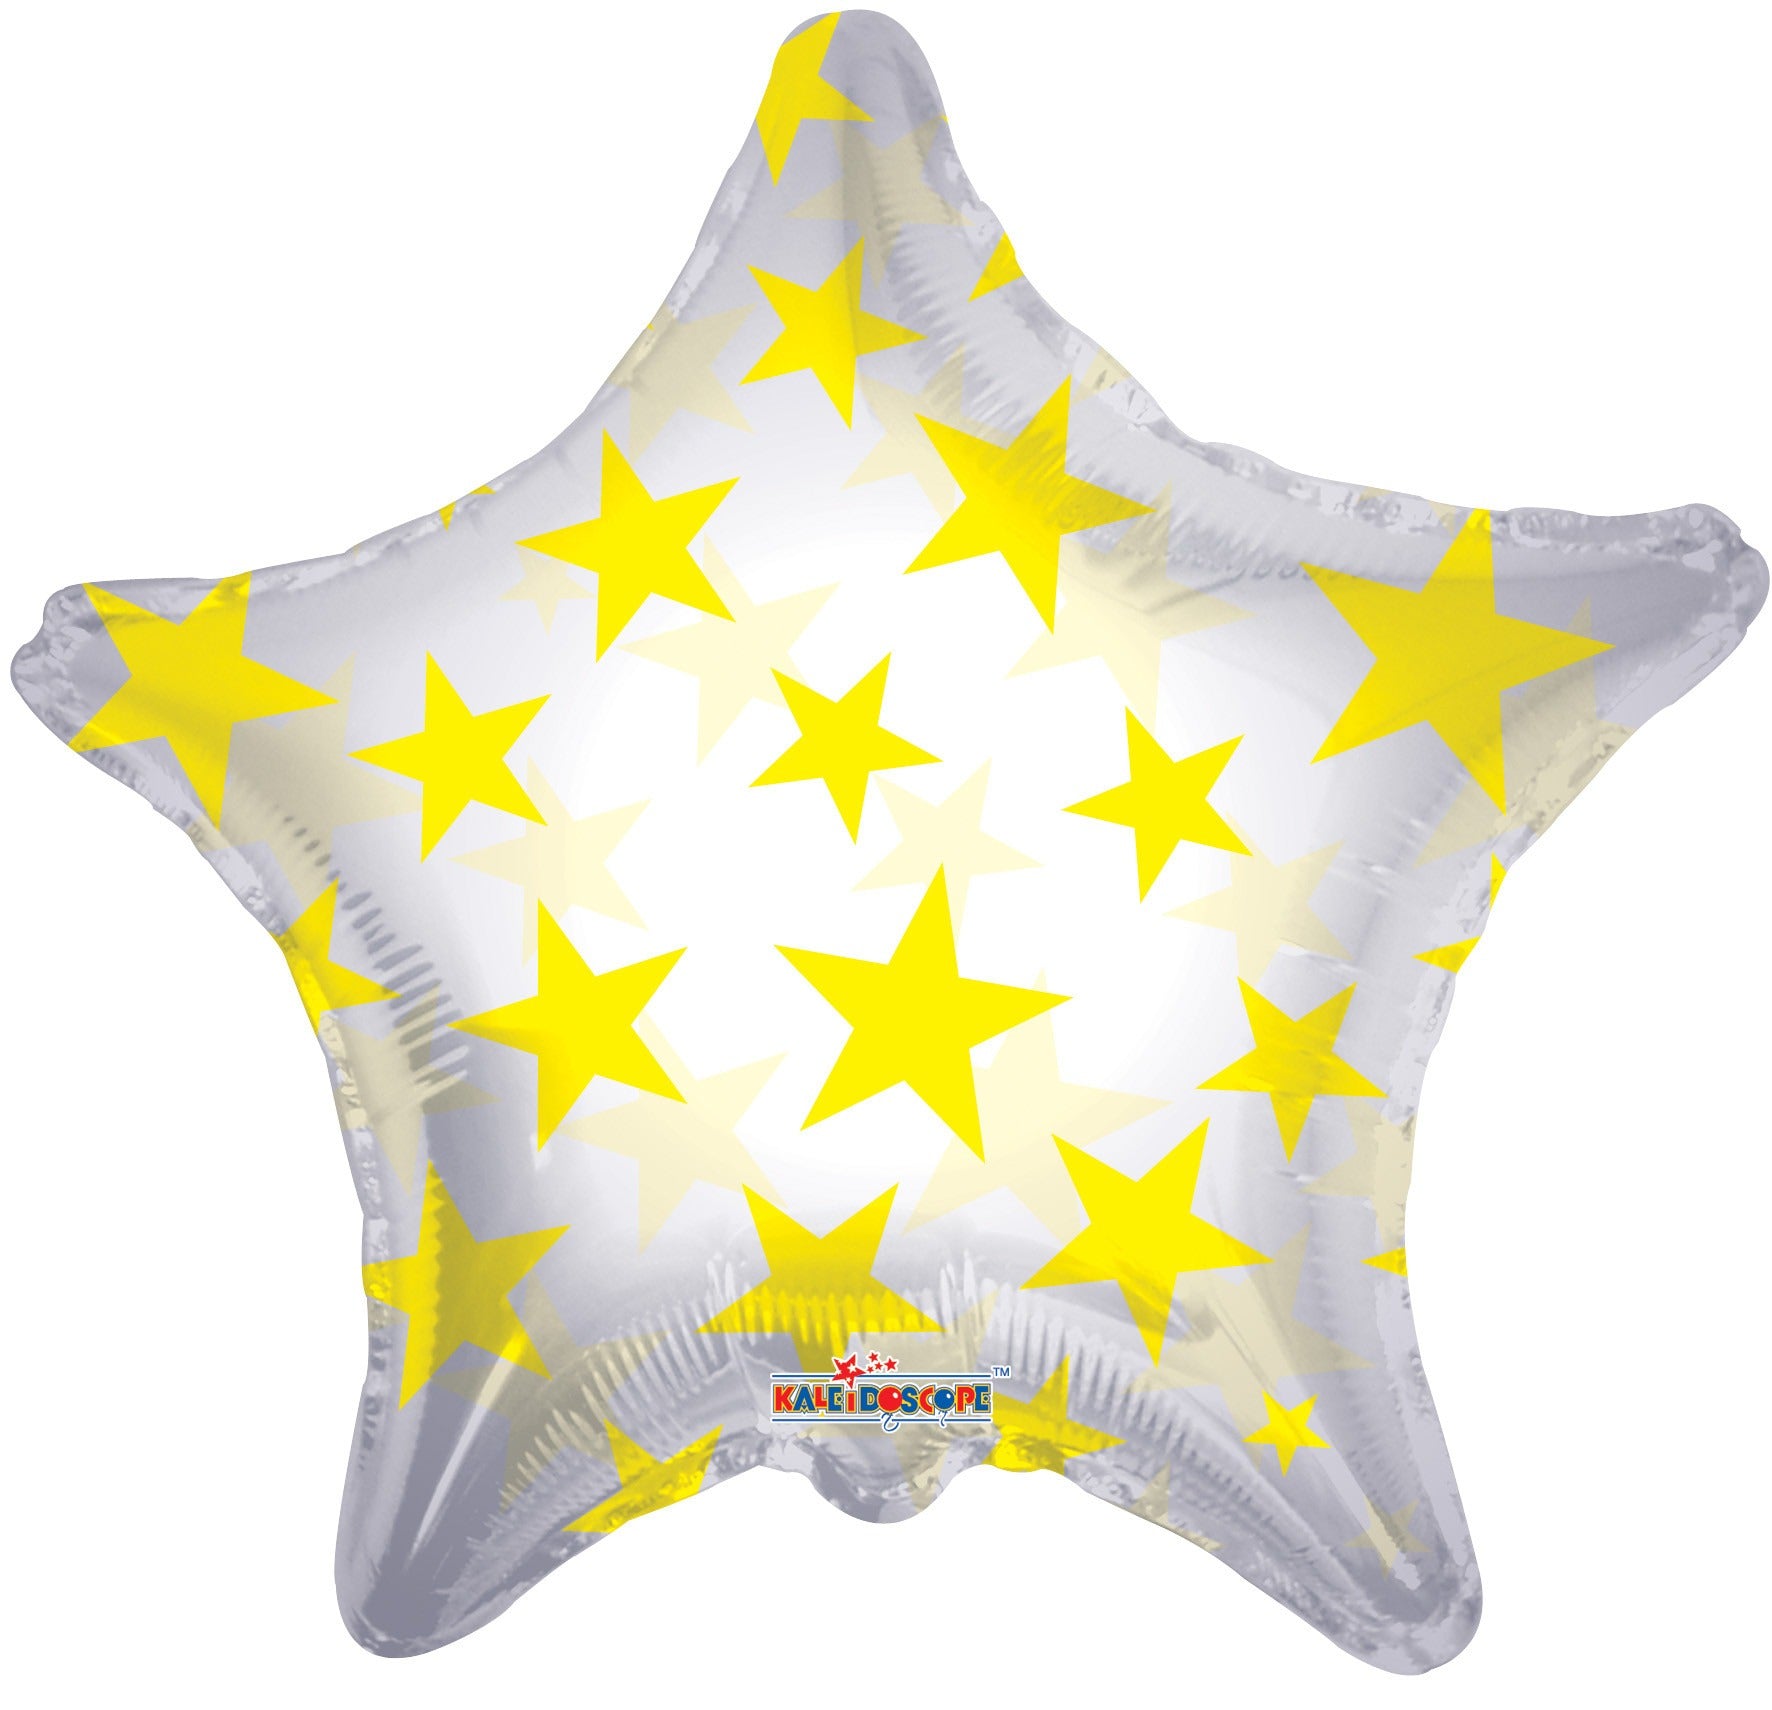 View Yellow Patterned Star Balloon 22inch information